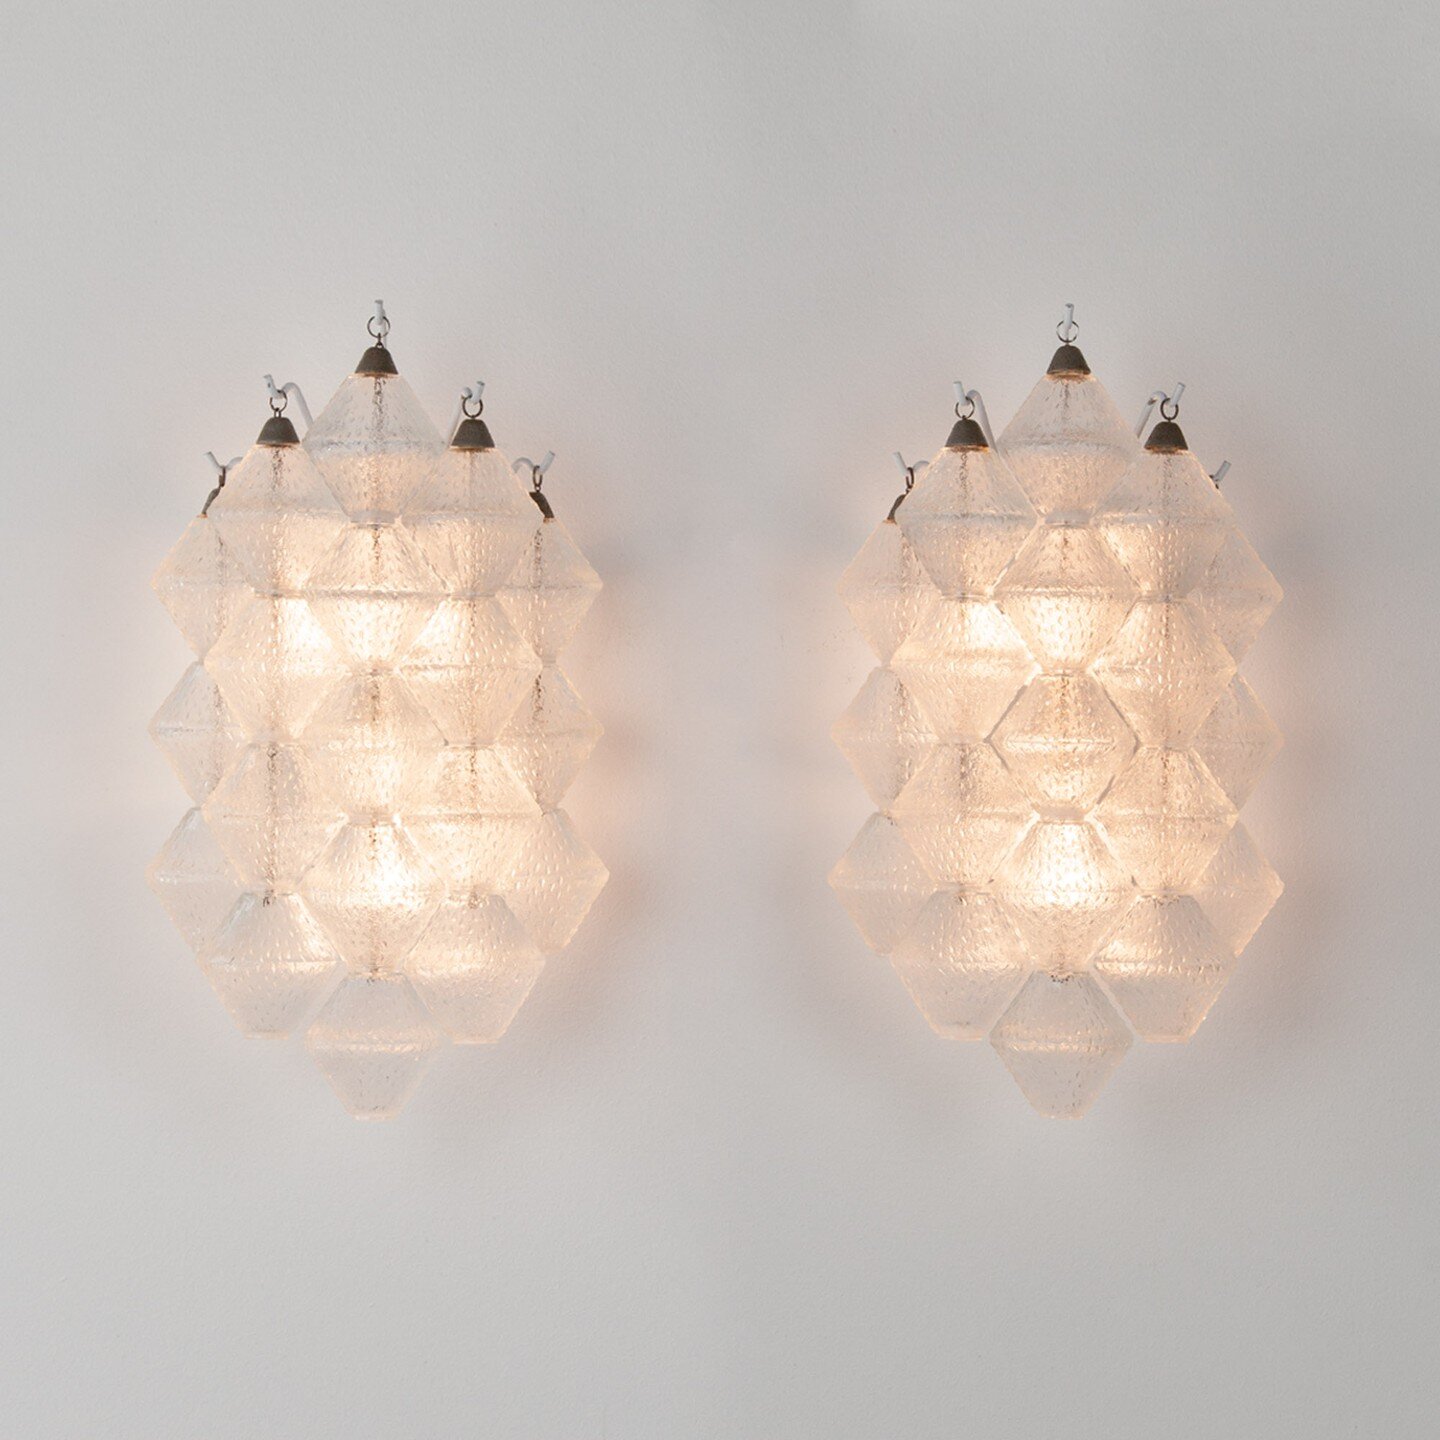 Pair of Italian Venini Murano Wall Lights, 1950s

A stunning and rare pair of Venini wall lights with five Murano glass pendants. Sourced in Italy.

Available now online at www.aesthetiker.com.au

#venini
#murano
#italiandesign
#italianvintage
#itali